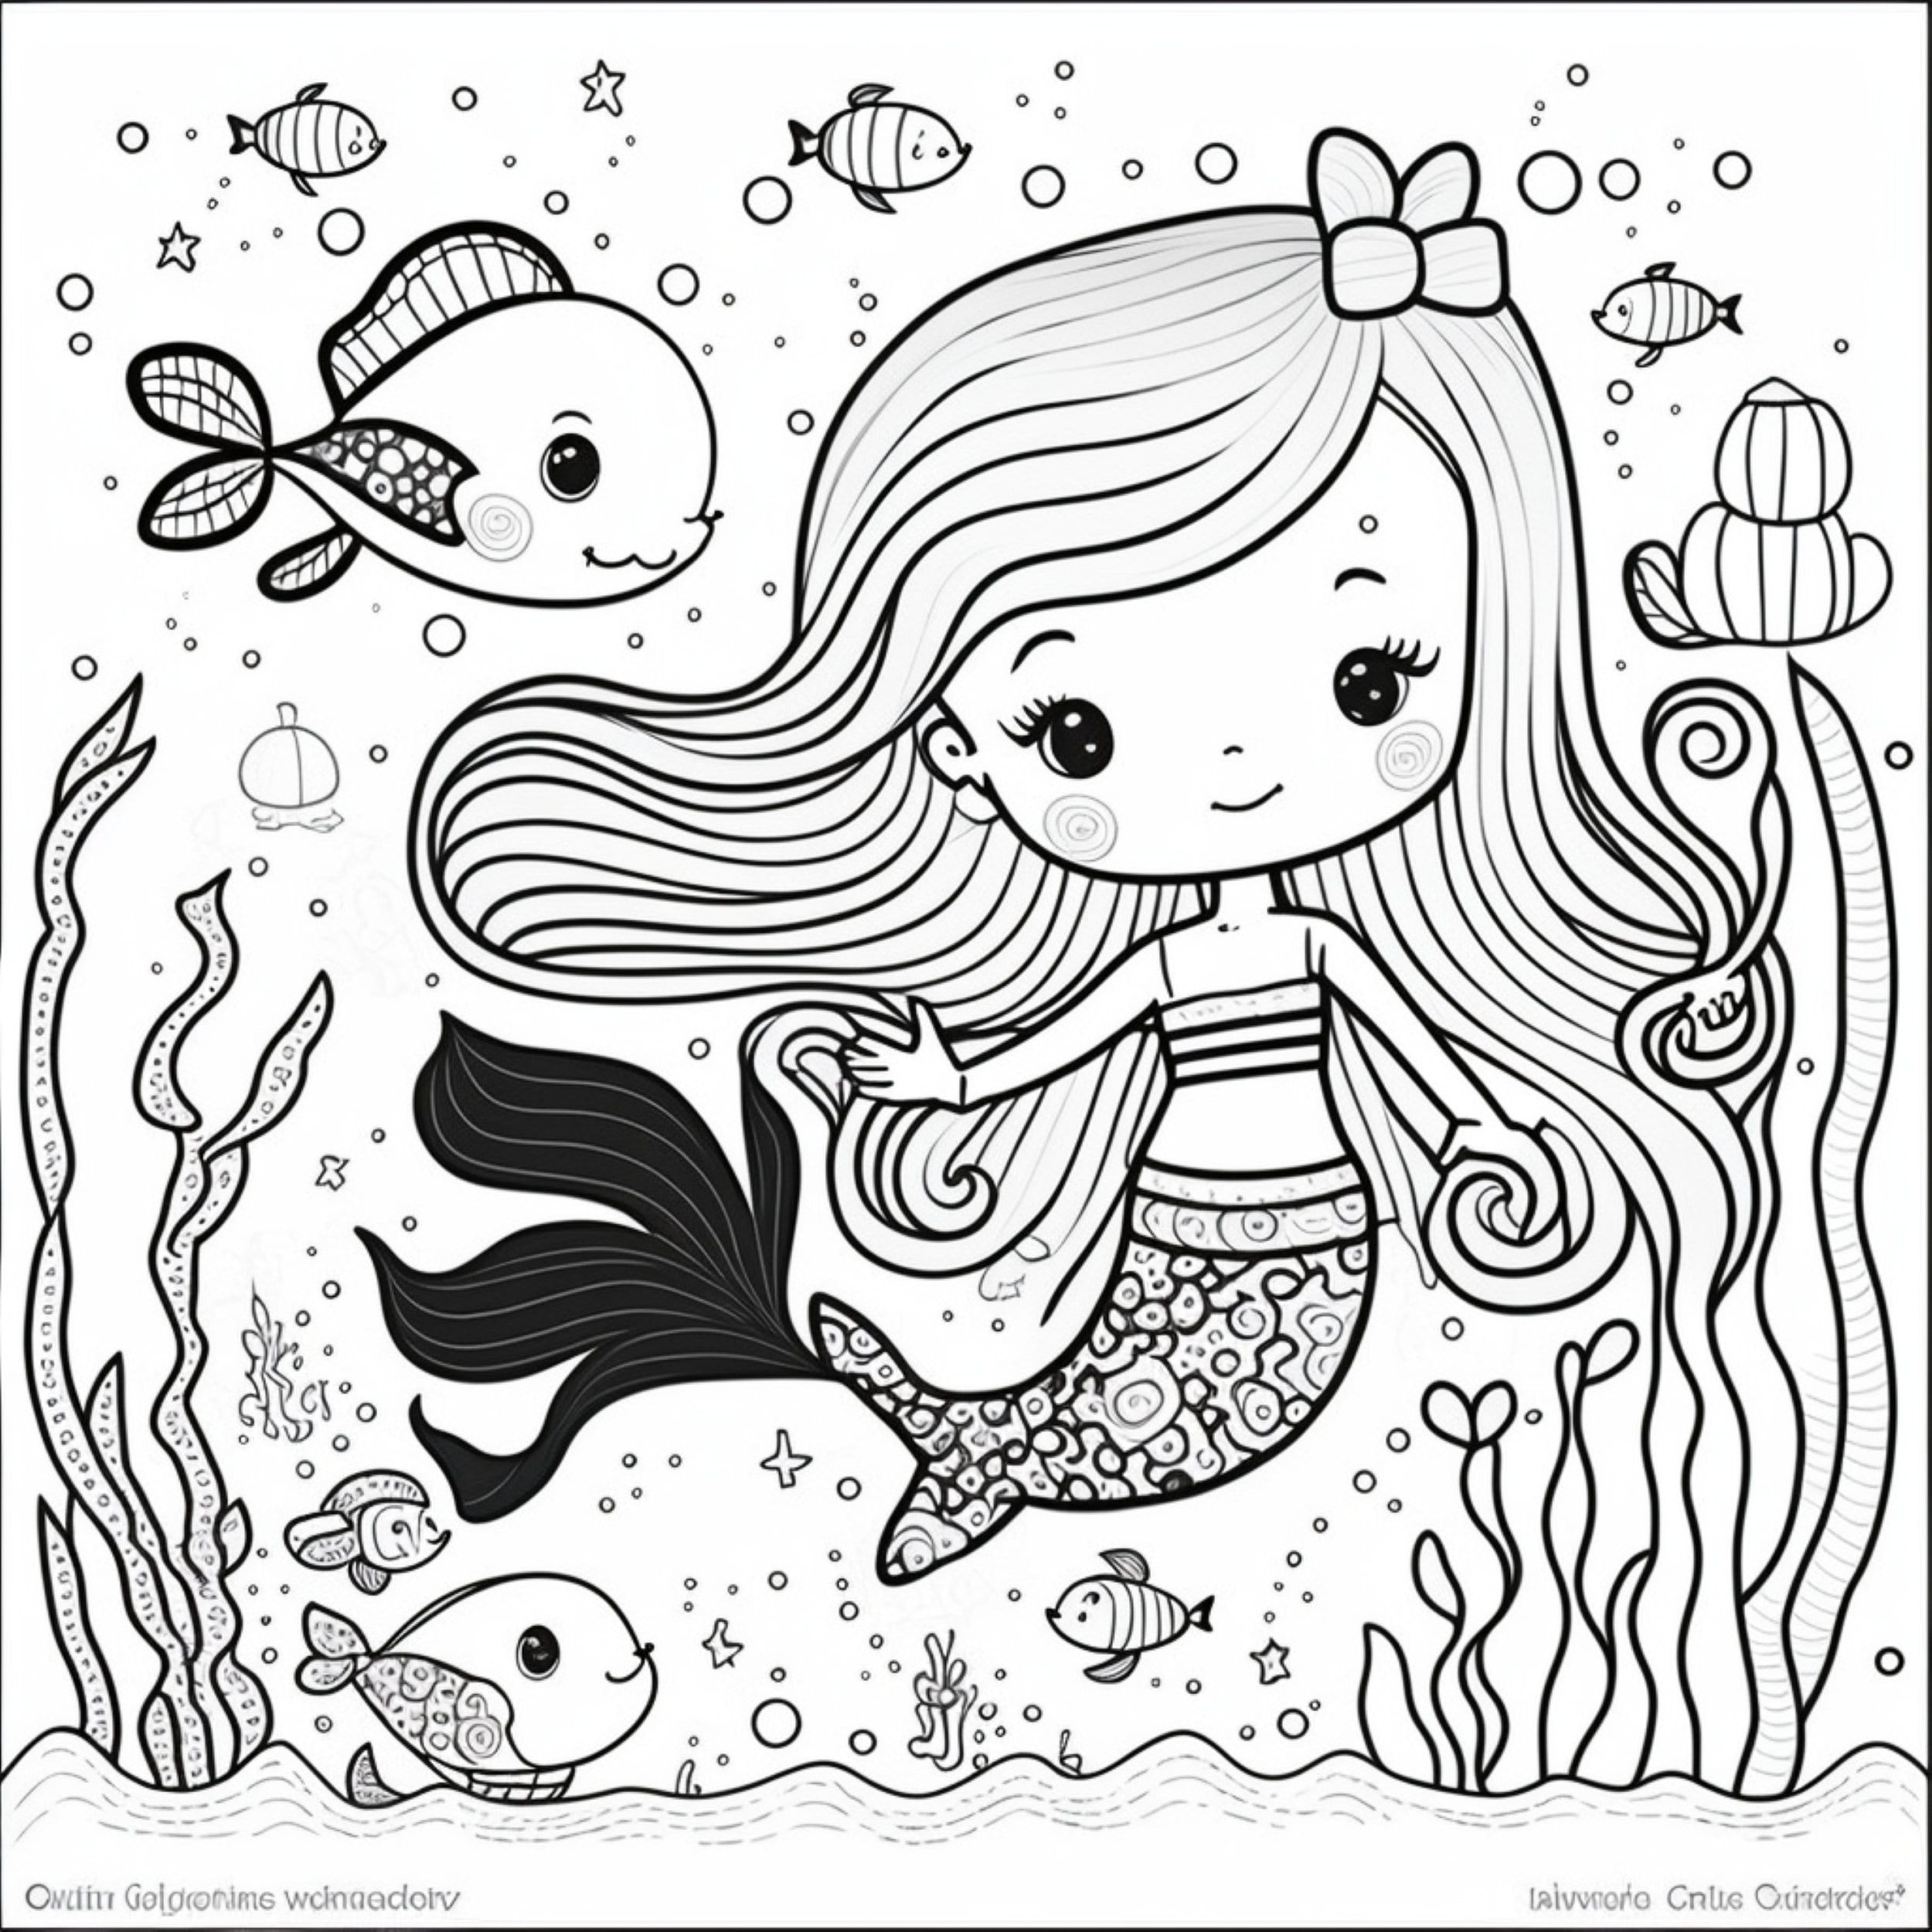 Mermaid 4 Coloring Pages 5 - Etsy